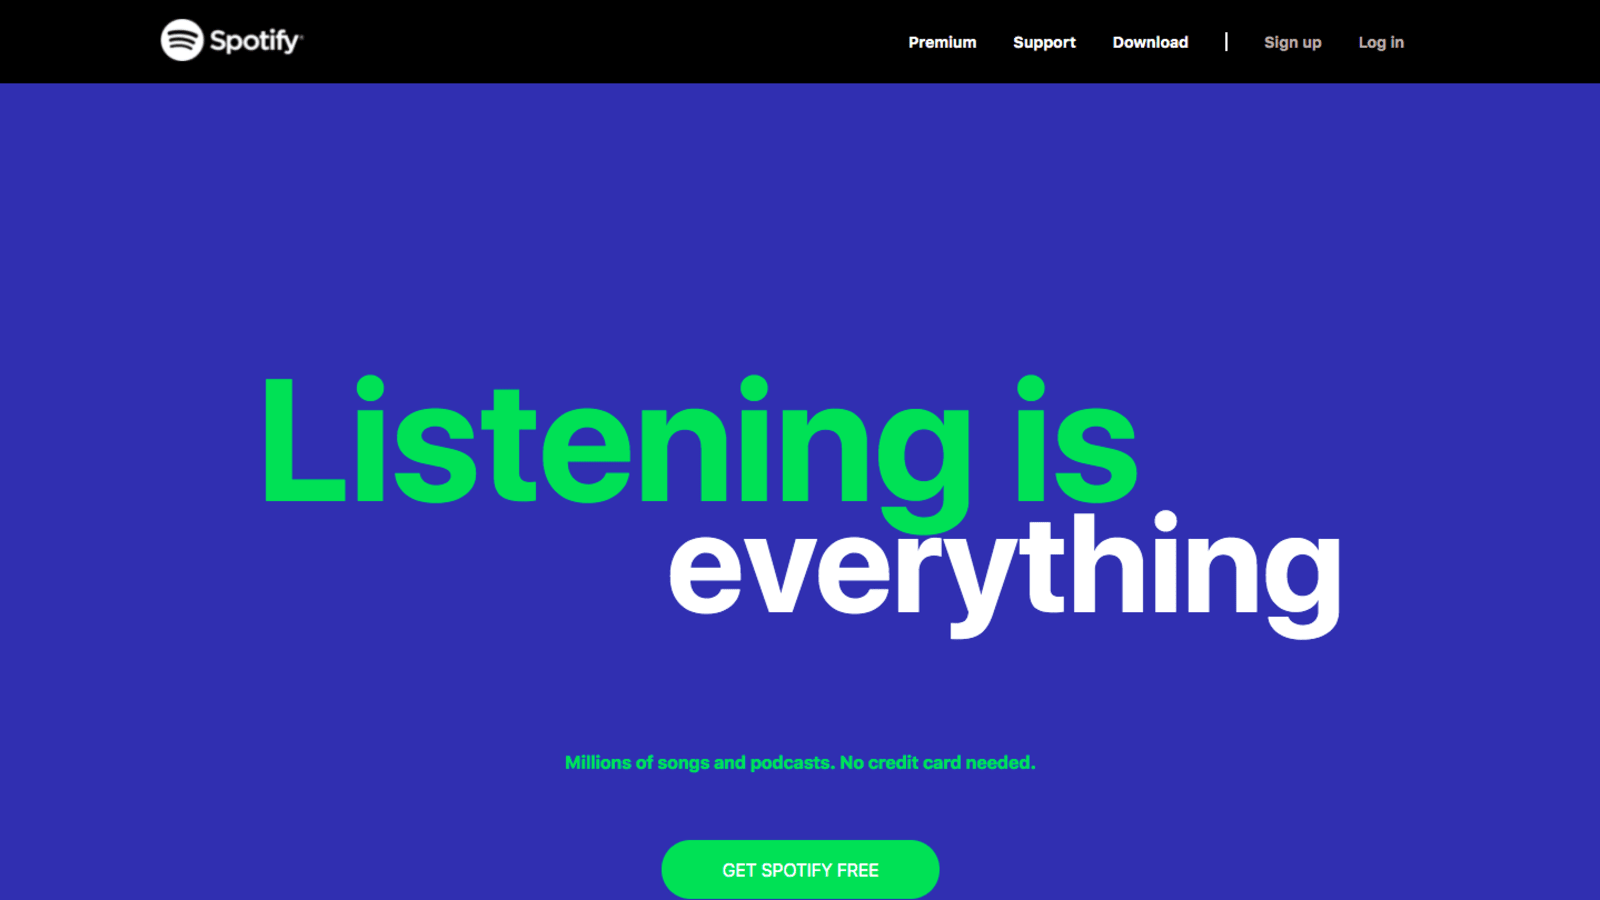 Spotify UX design example